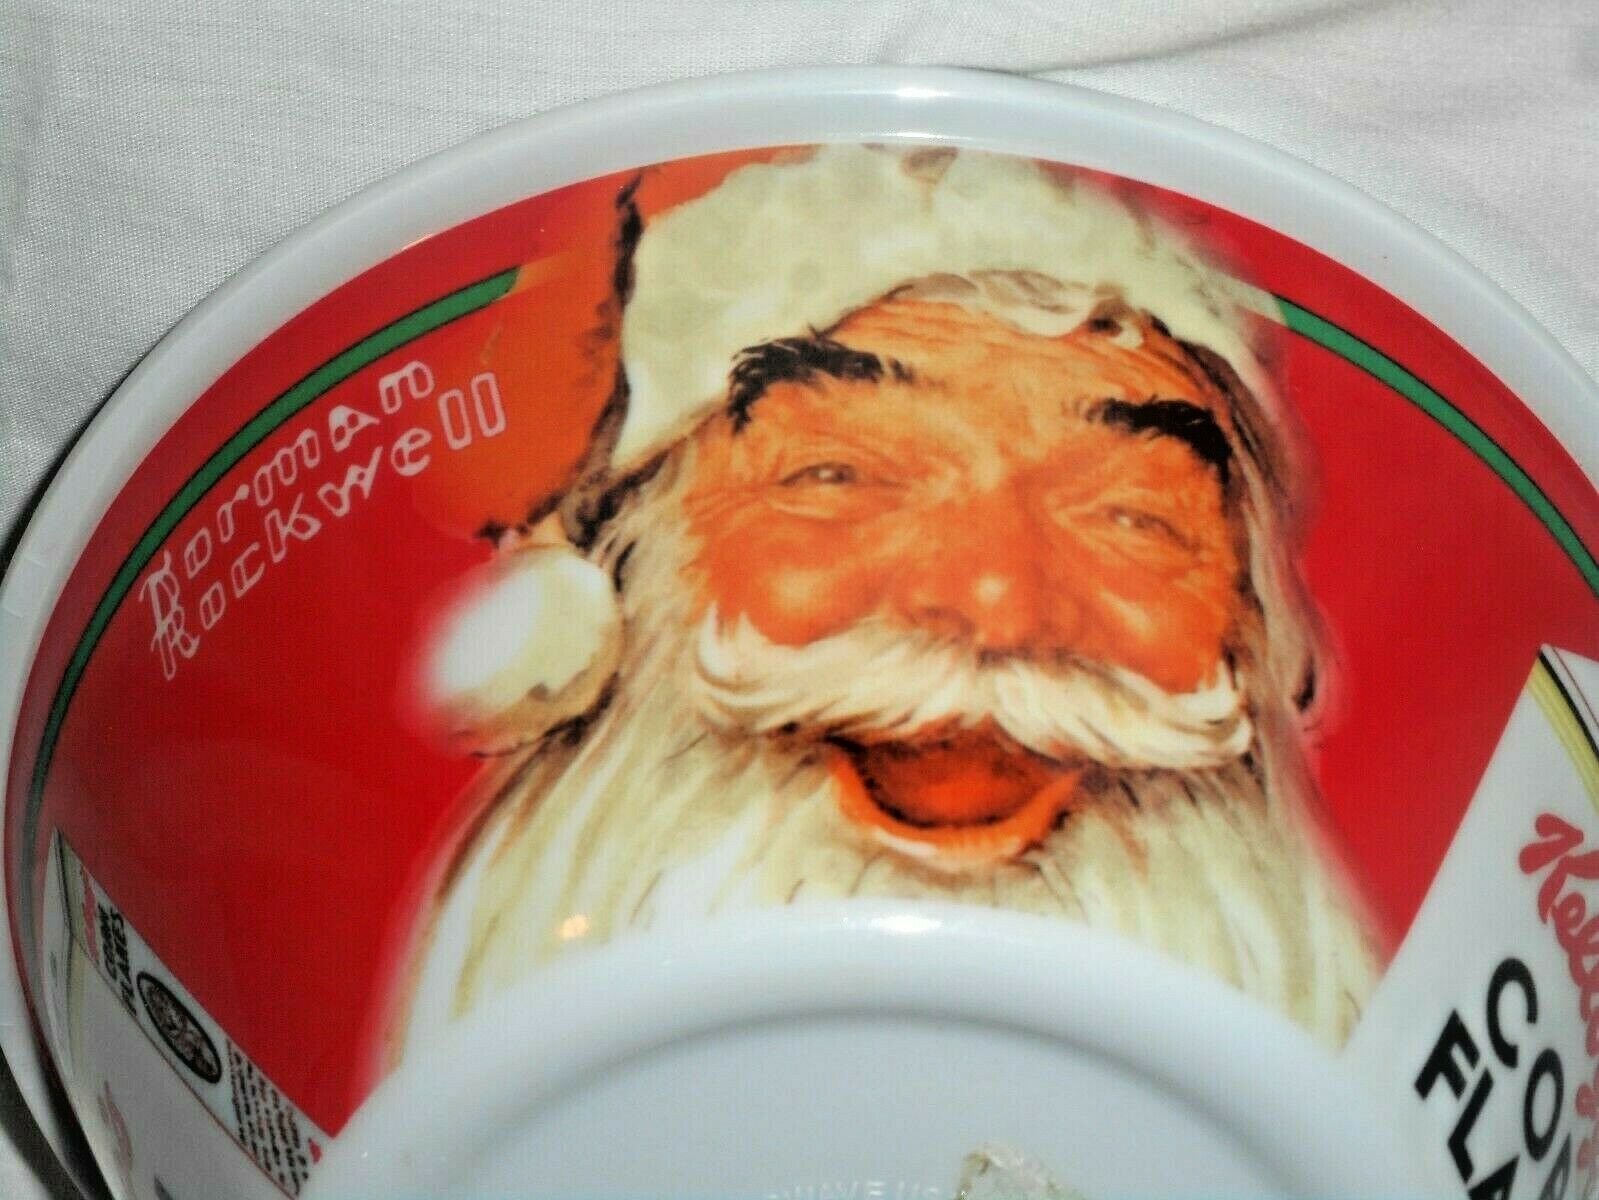 NEW NEVER USED 2005 Kellogg's NORMAN ROCKWELL 100 years HUGE Cereal Bowl Plastic - $13.53